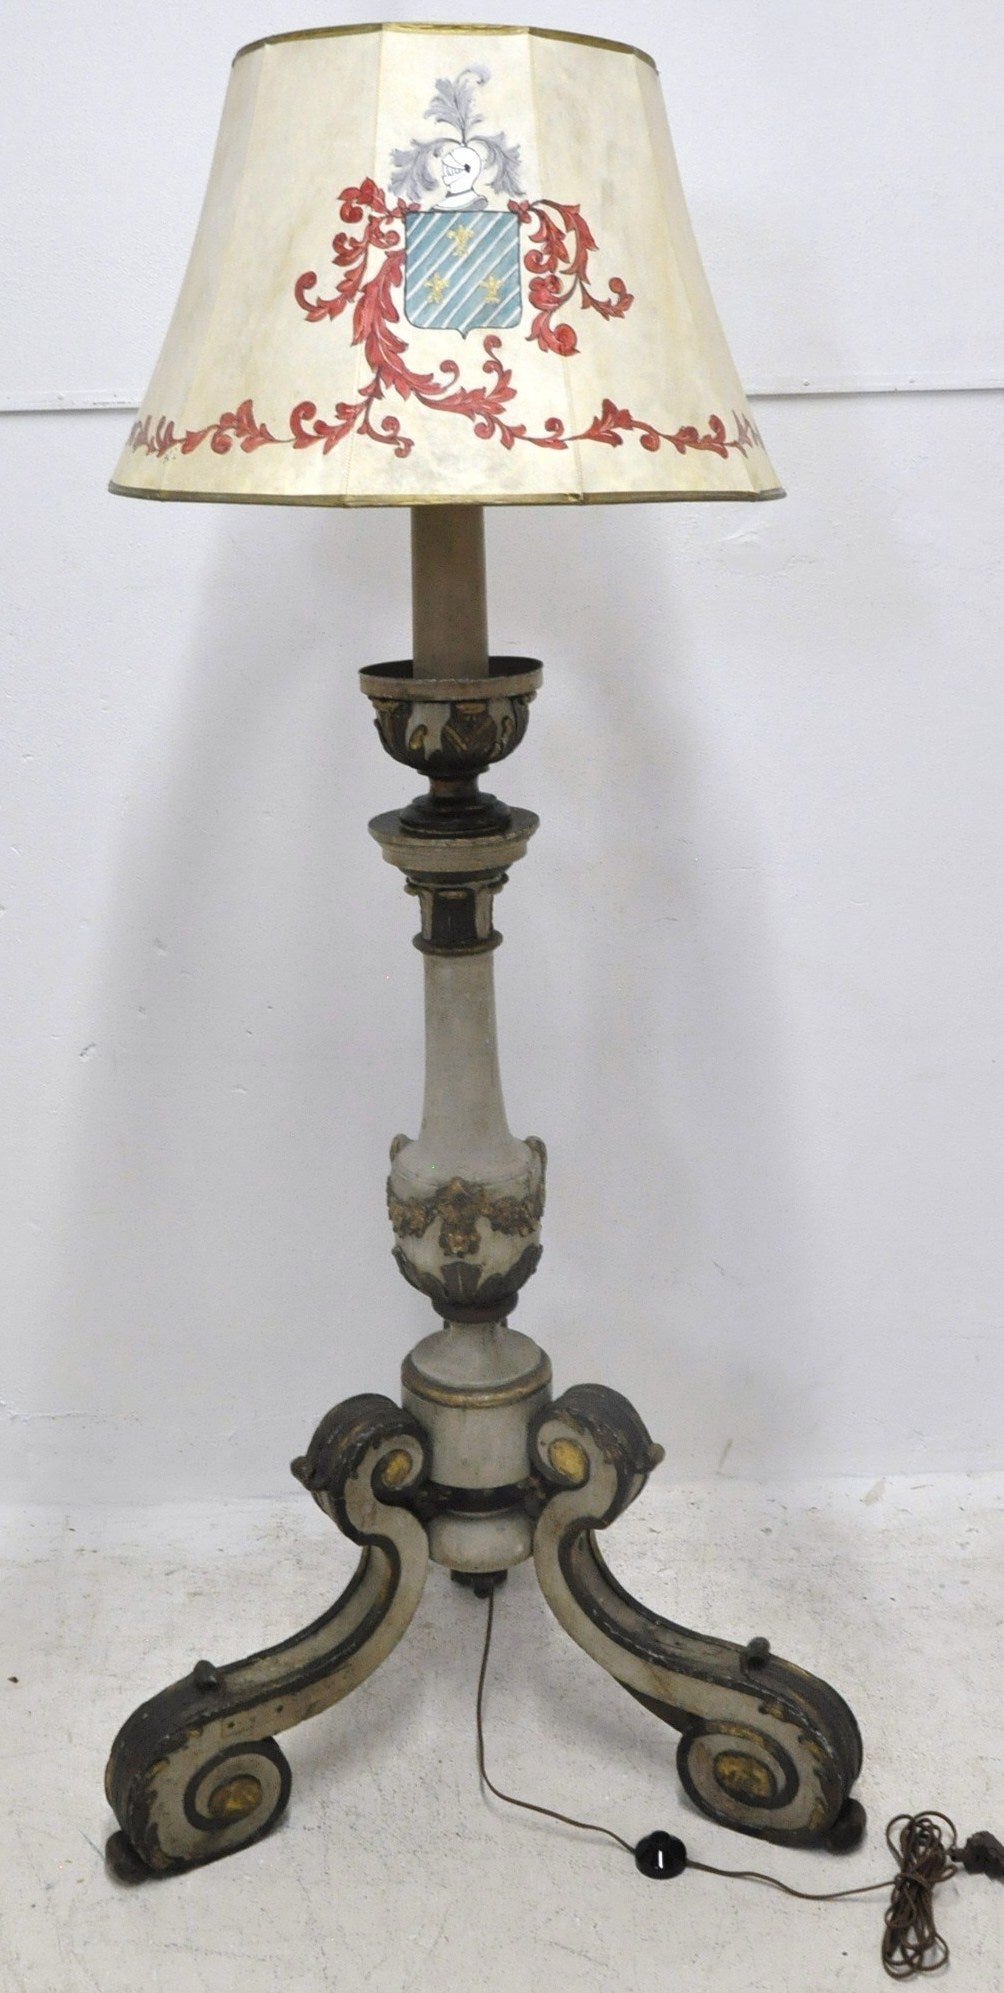 This tall antique wood floor lamp was carved in Italy, circa 1850. The light stands a wide three-leg pedestal base with intricate scroll decor and the stem is decorated with elegant carvings, embellished at the shoulder by a metal cup under the